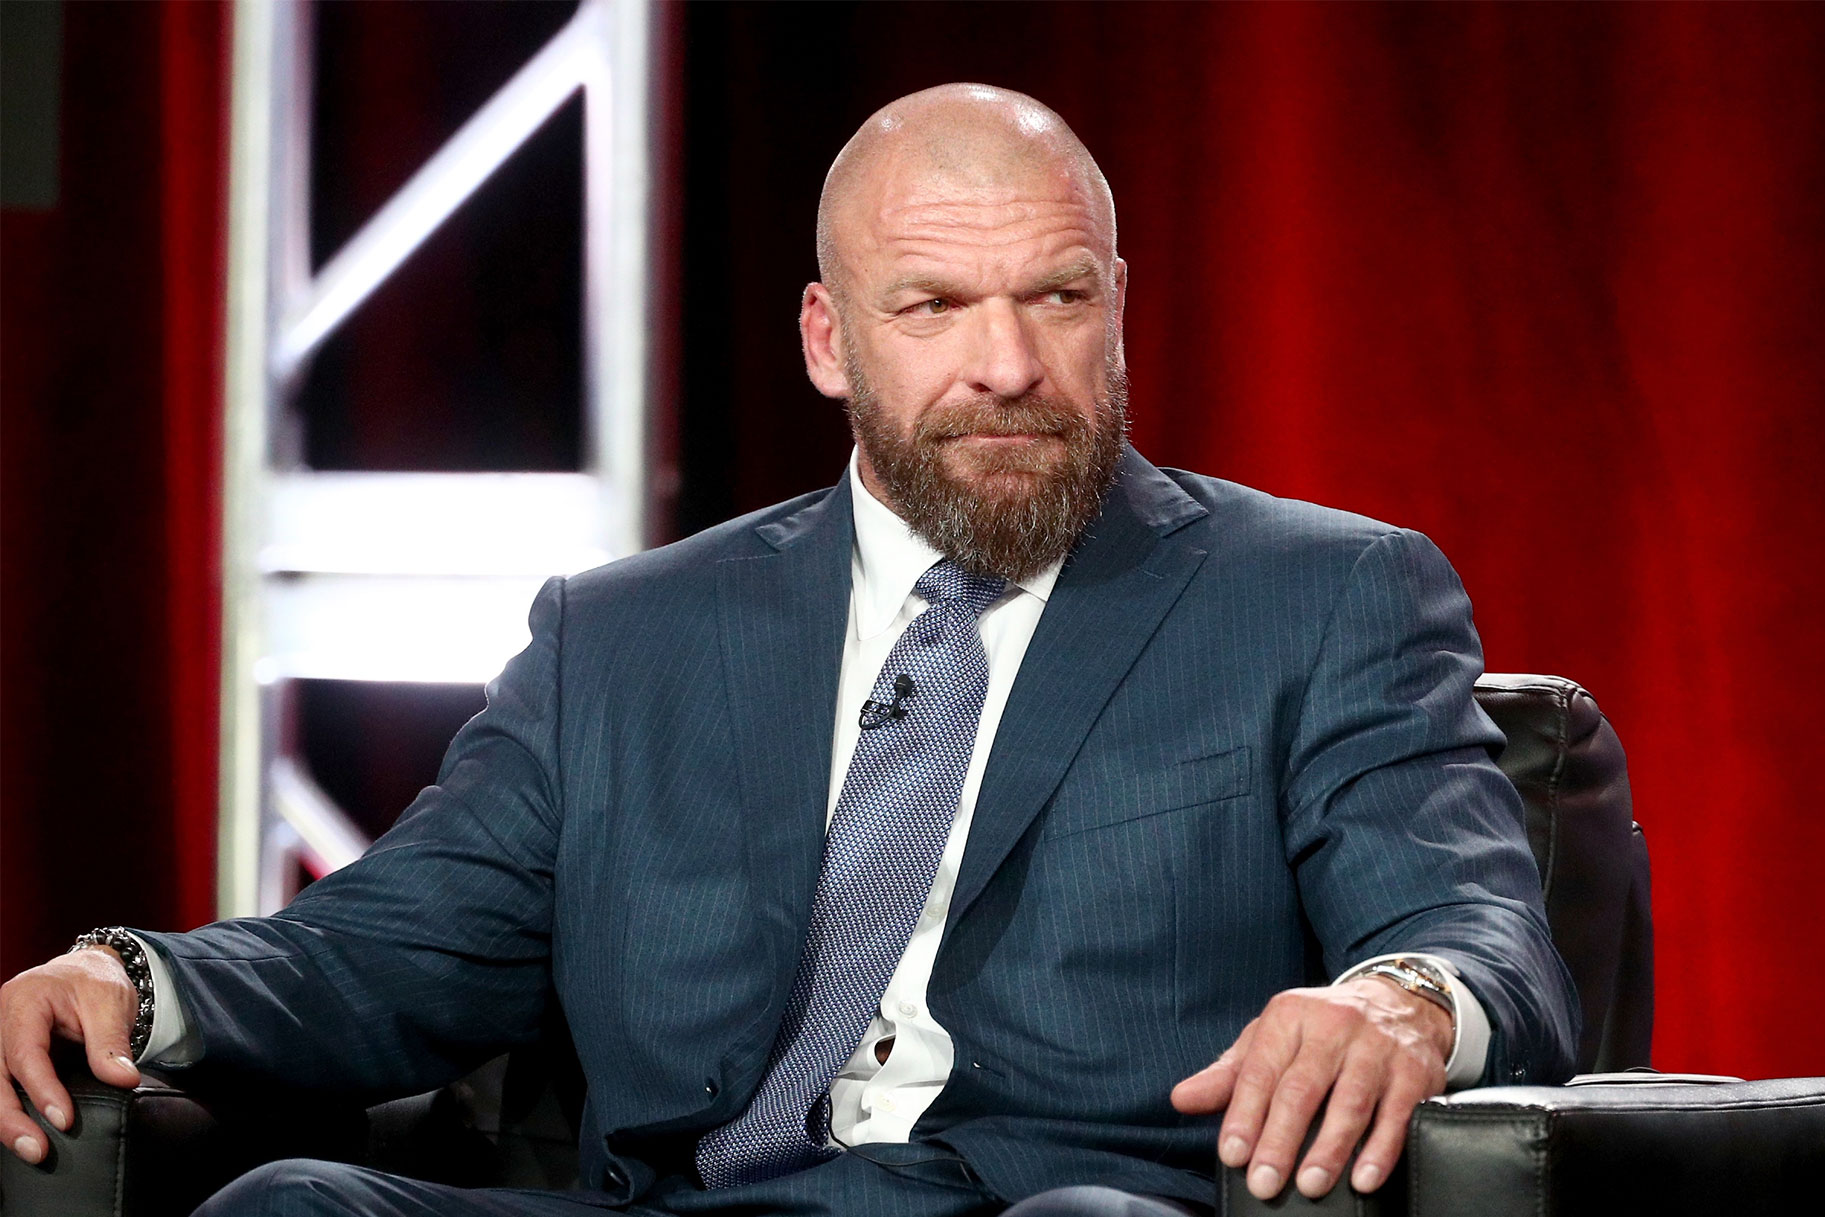 Triple H sitting in a chair, wearing a suit